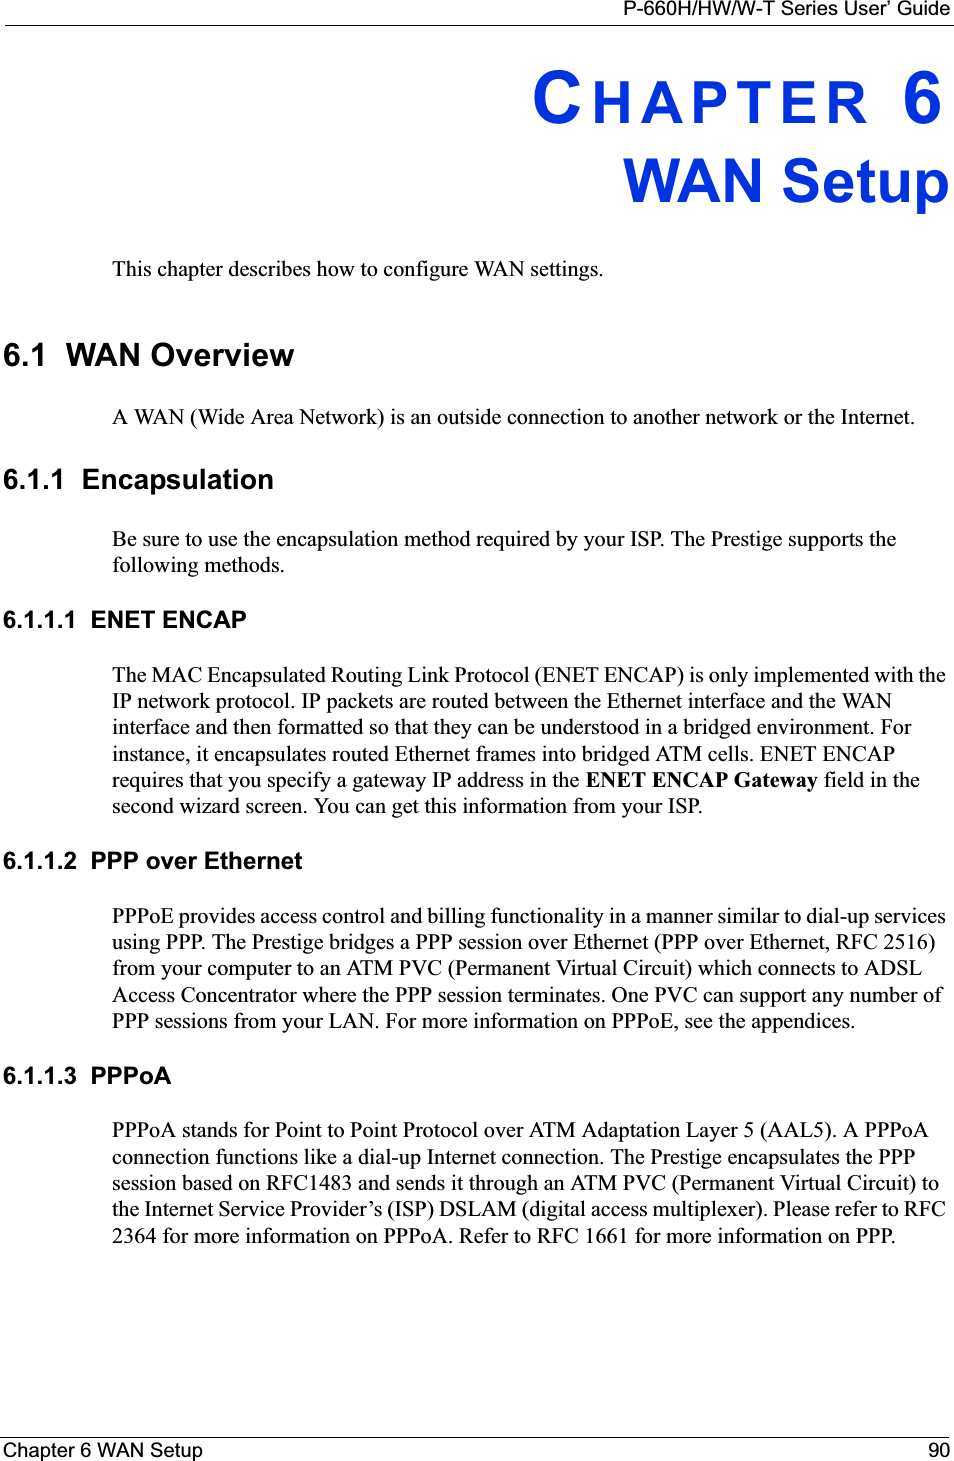 P-660H/HW/W-T Series User’ GuideChapter 6 WAN Setup 90CHAPTER 6WAN SetupThis chapter describes how to configure WAN settings.6.1  WAN Overview A WAN (Wide Area Network) is an outside connection to another network or the Internet.6.1.1  EncapsulationBe sure to use the encapsulation method required by your ISP. The Prestige supports the following methods.6.1.1.1  ENET ENCAPThe MAC Encapsulated Routing Link Protocol (ENET ENCAP) is only implemented with the IP network protocol. IP packets are routed between the Ethernet interface and the WAN interface and then formatted so that they can be understood in a bridged environment. For instance, it encapsulates routed Ethernet frames into bridged ATM cells. ENET ENCAP requires that you specify a gateway IP address in the ENET ENCAP Gateway field in the second wizard screen. You can get this information from your ISP.6.1.1.2  PPP over EthernetPPPoE provides access control and billing functionality in a manner similar to dial-up services using PPP. The Prestige bridges a PPP session over Ethernet (PPP over Ethernet, RFC 2516) from your computer to an ATM PVC (Permanent Virtual Circuit) which connects to ADSL Access Concentrator where the PPP session terminates. One PVC can support any number of PPP sessions from your LAN. For more information on PPPoE, see the appendices.6.1.1.3  PPPoAPPPoA stands for Point to Point Protocol over ATM Adaptation Layer 5 (AAL5). A PPPoA connection functions like a dial-up Internet connection. The Prestige encapsulates the PPP session based on RFC1483 and sends it through an ATM PVC (Permanent Virtual Circuit) to the Internet Service Provider’s (ISP) DSLAM (digital access multiplexer). Please refer to RFC 2364 for more information on PPPoA. Refer to RFC 1661 for more information on PPP.